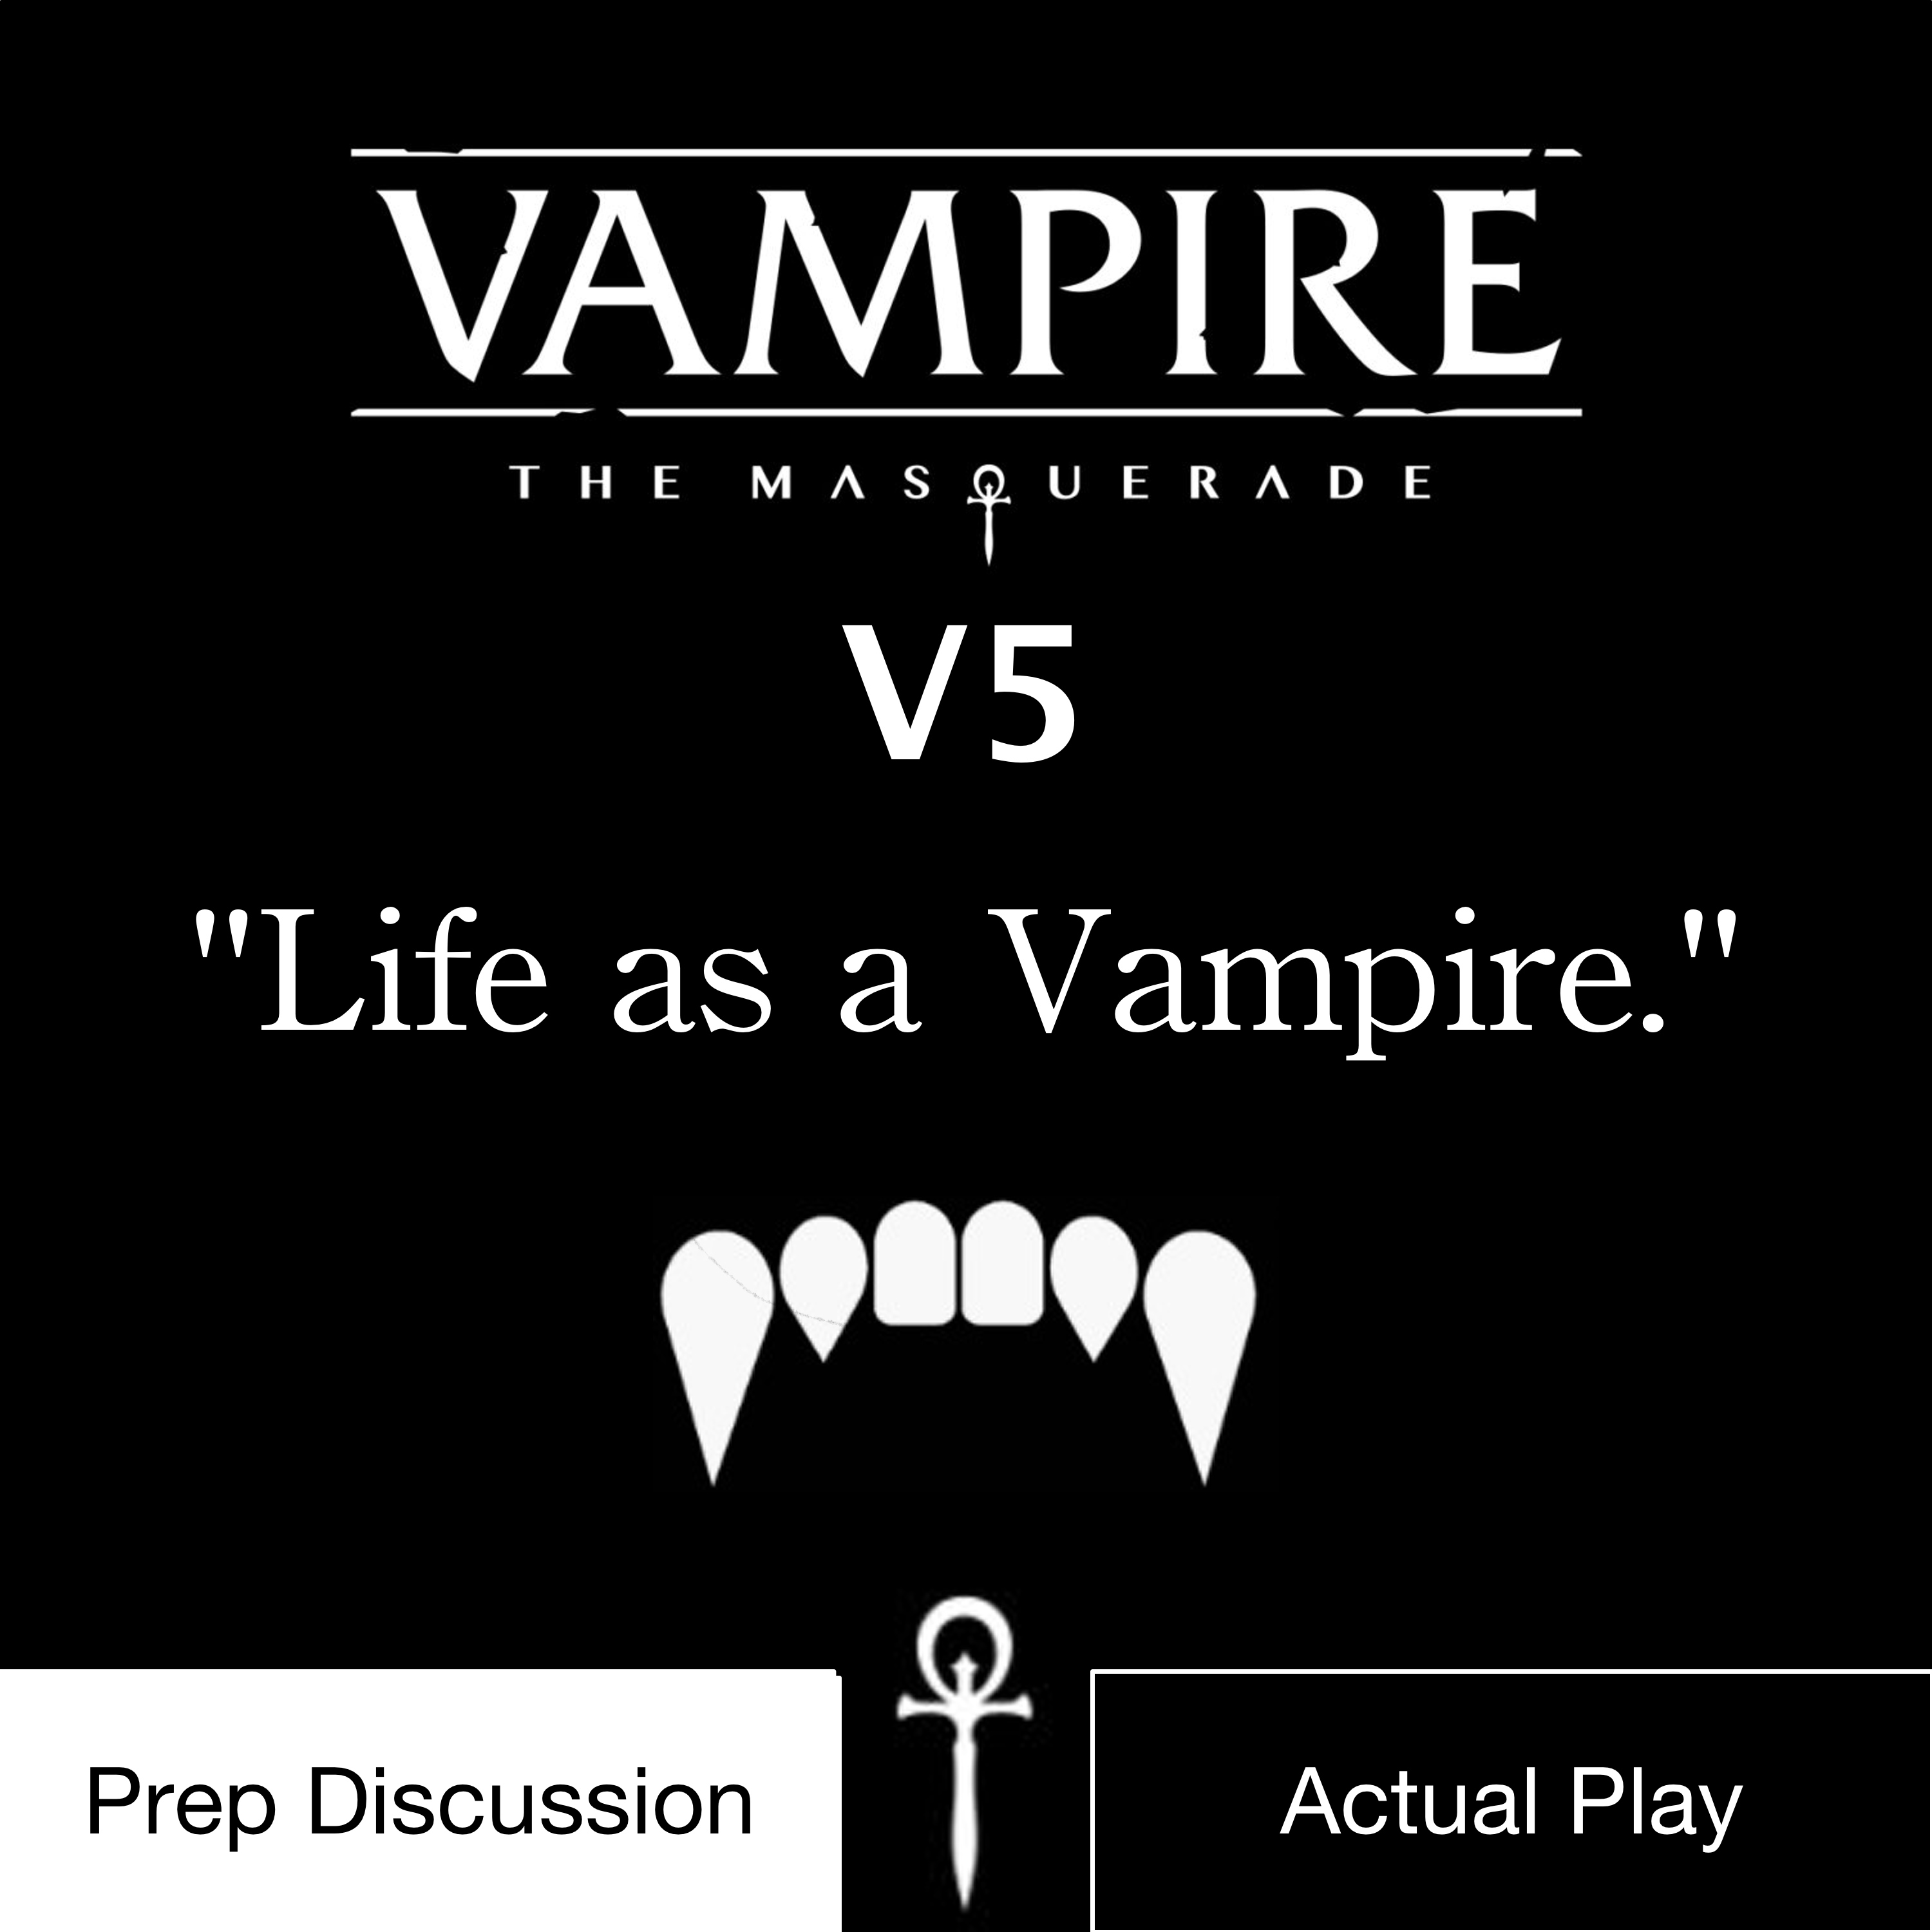 An image of fangs meant to represent the Life as a Vampire project